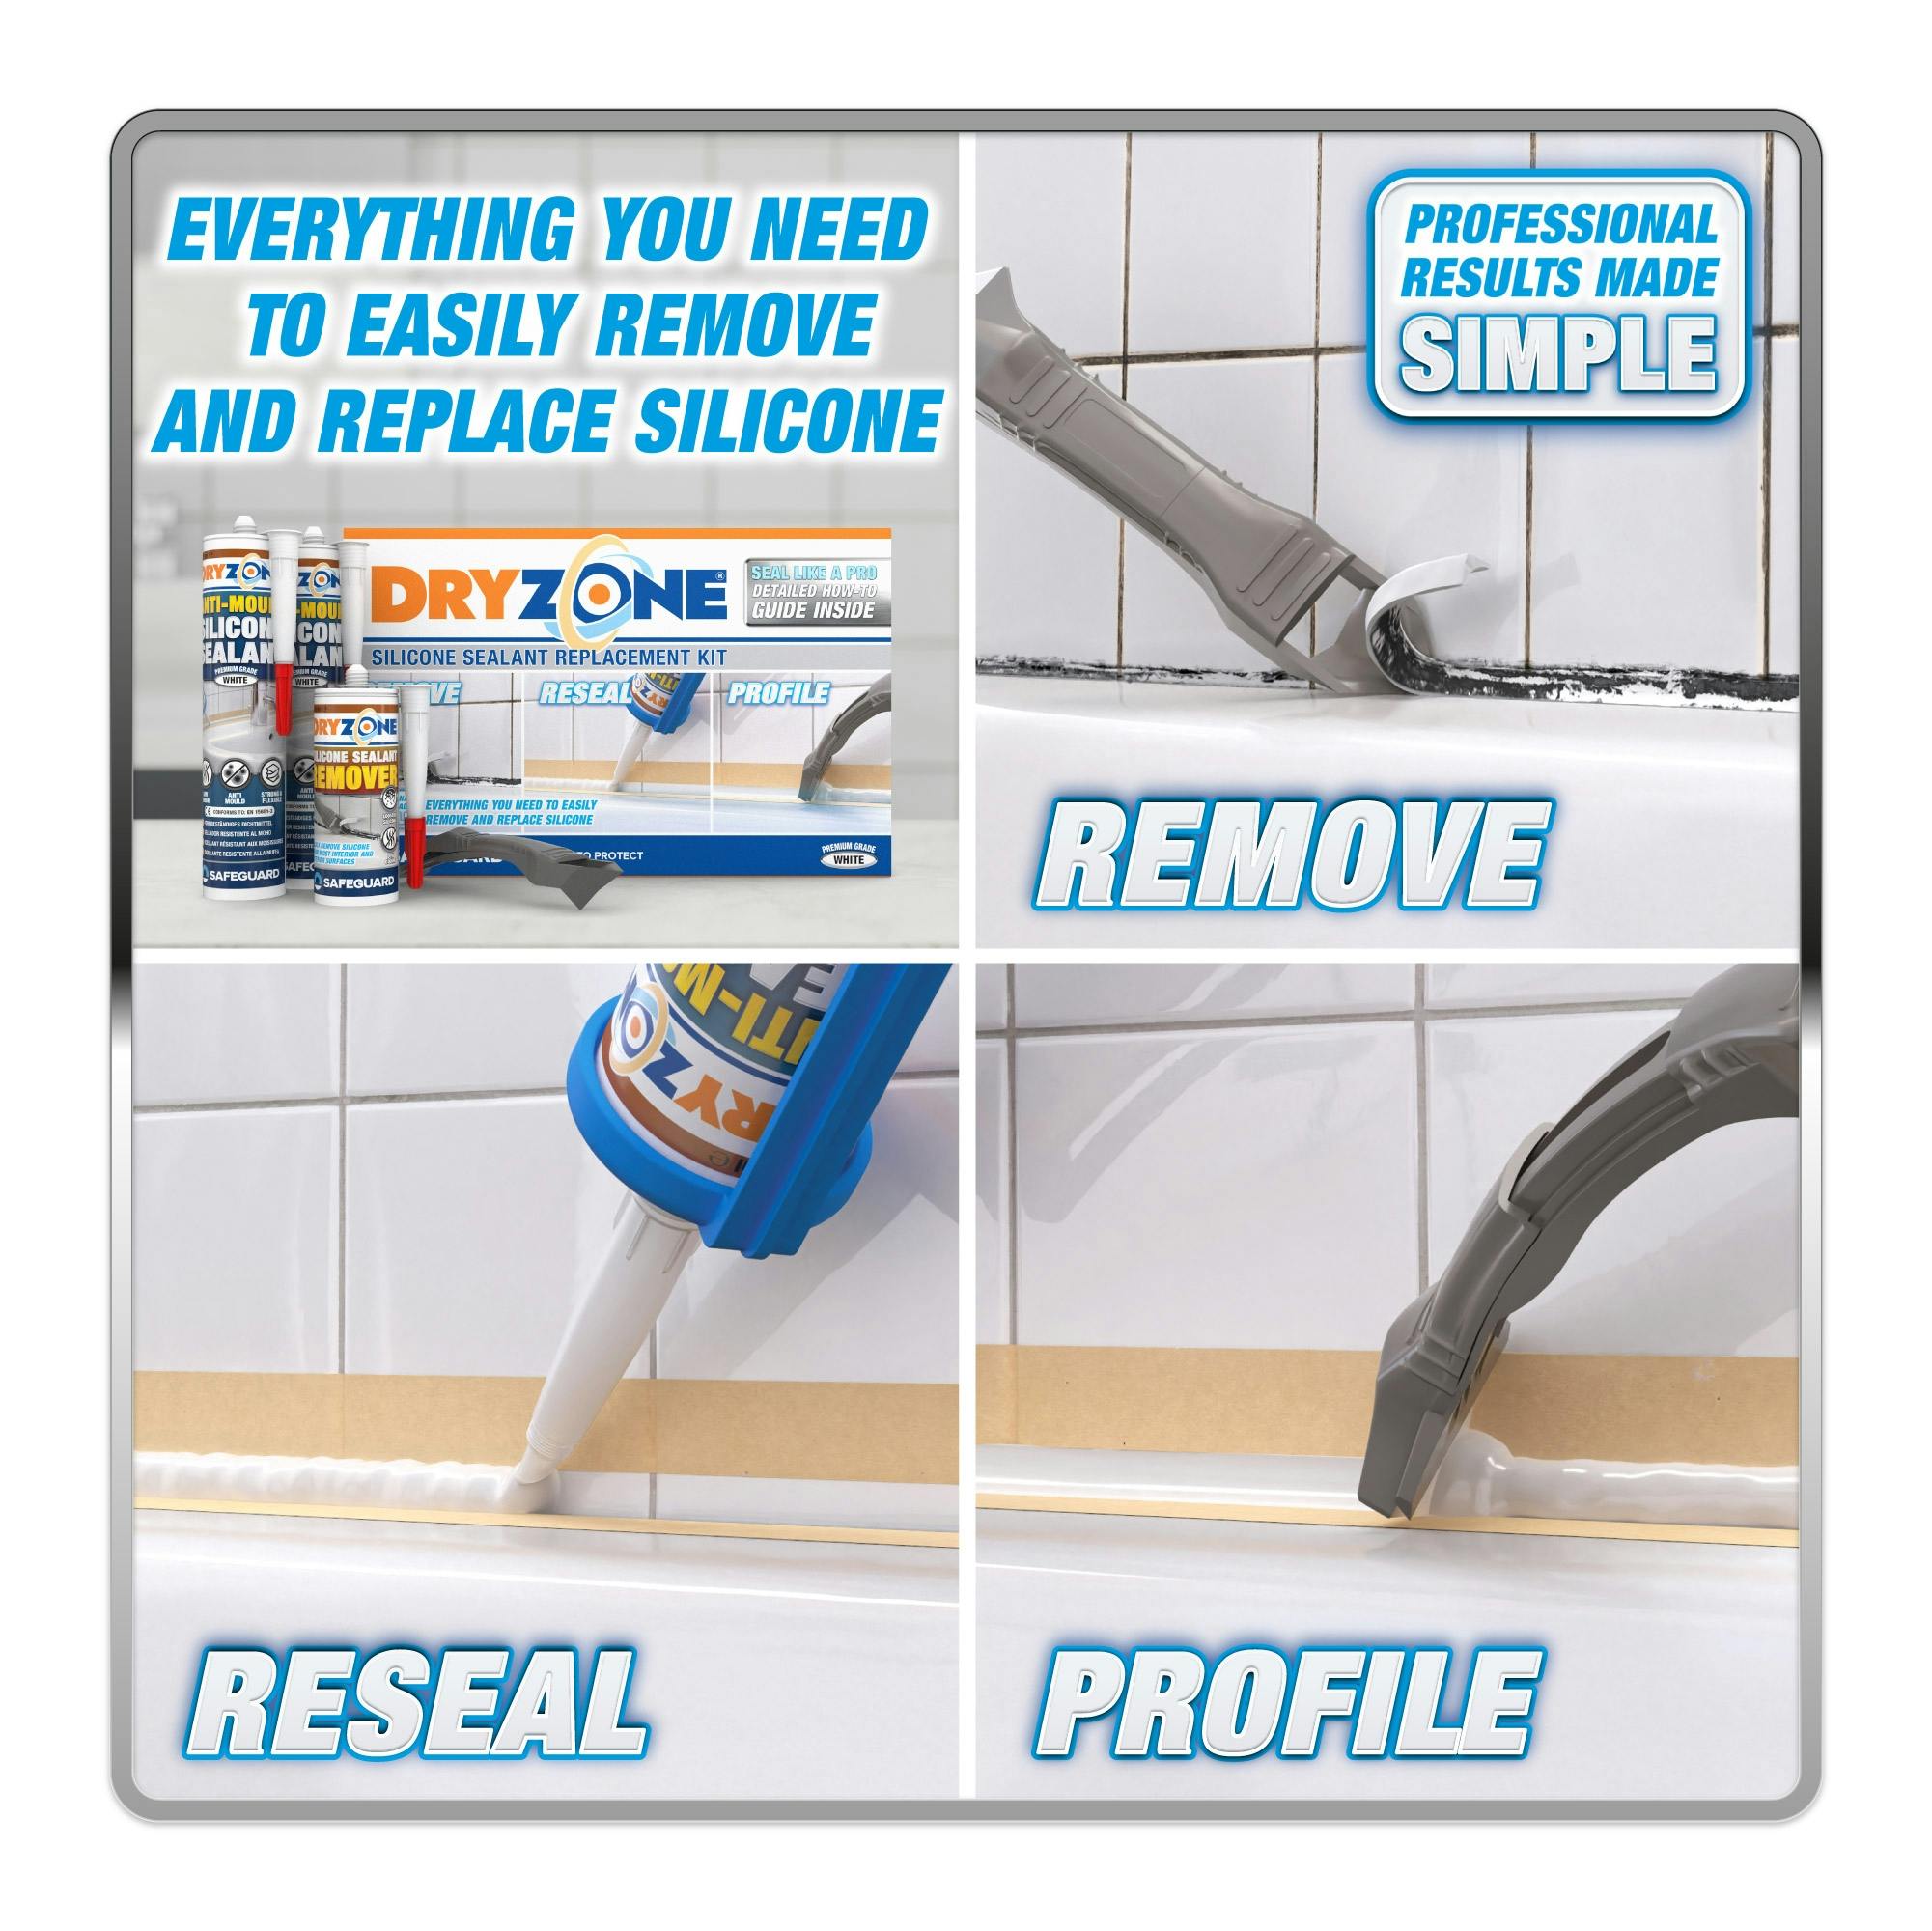 Remove, Reseal and Profile with Dryzone